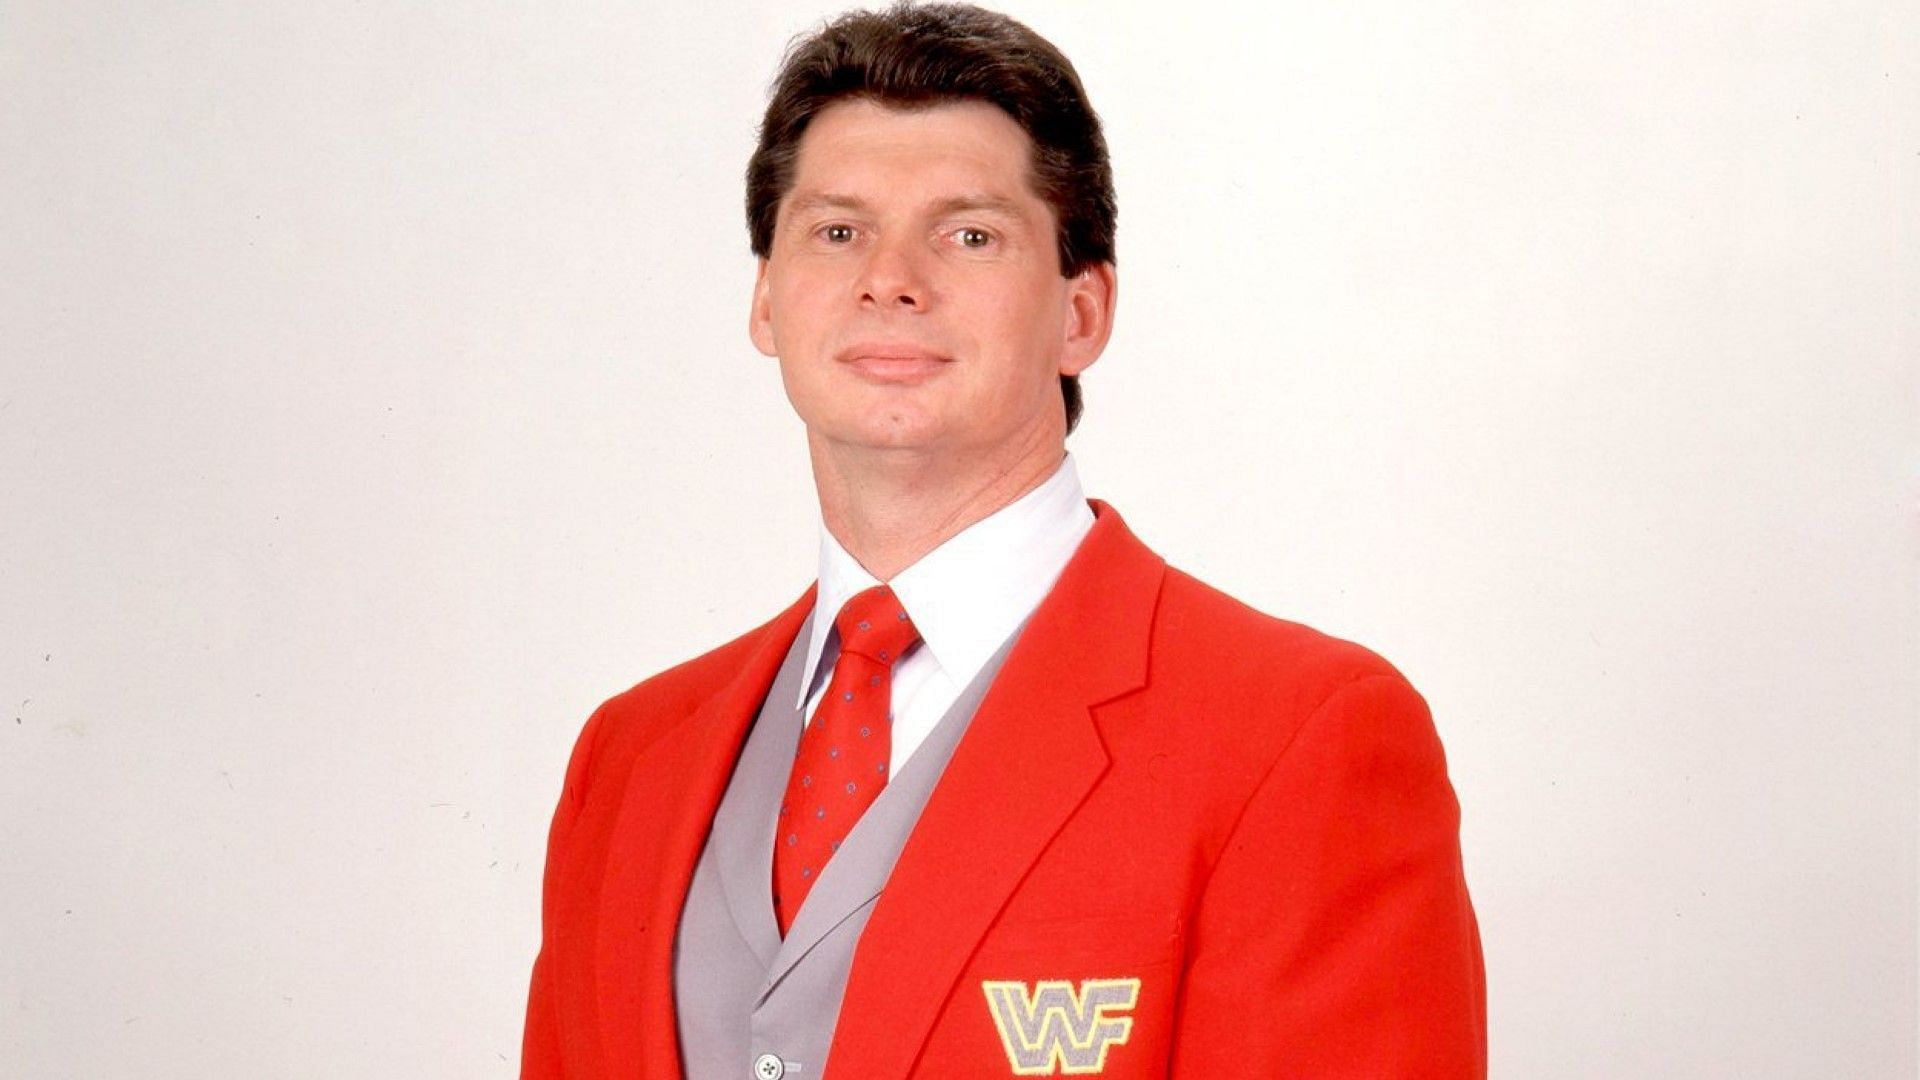 A young Vince McMahon, WWE co-founder and former Chairman